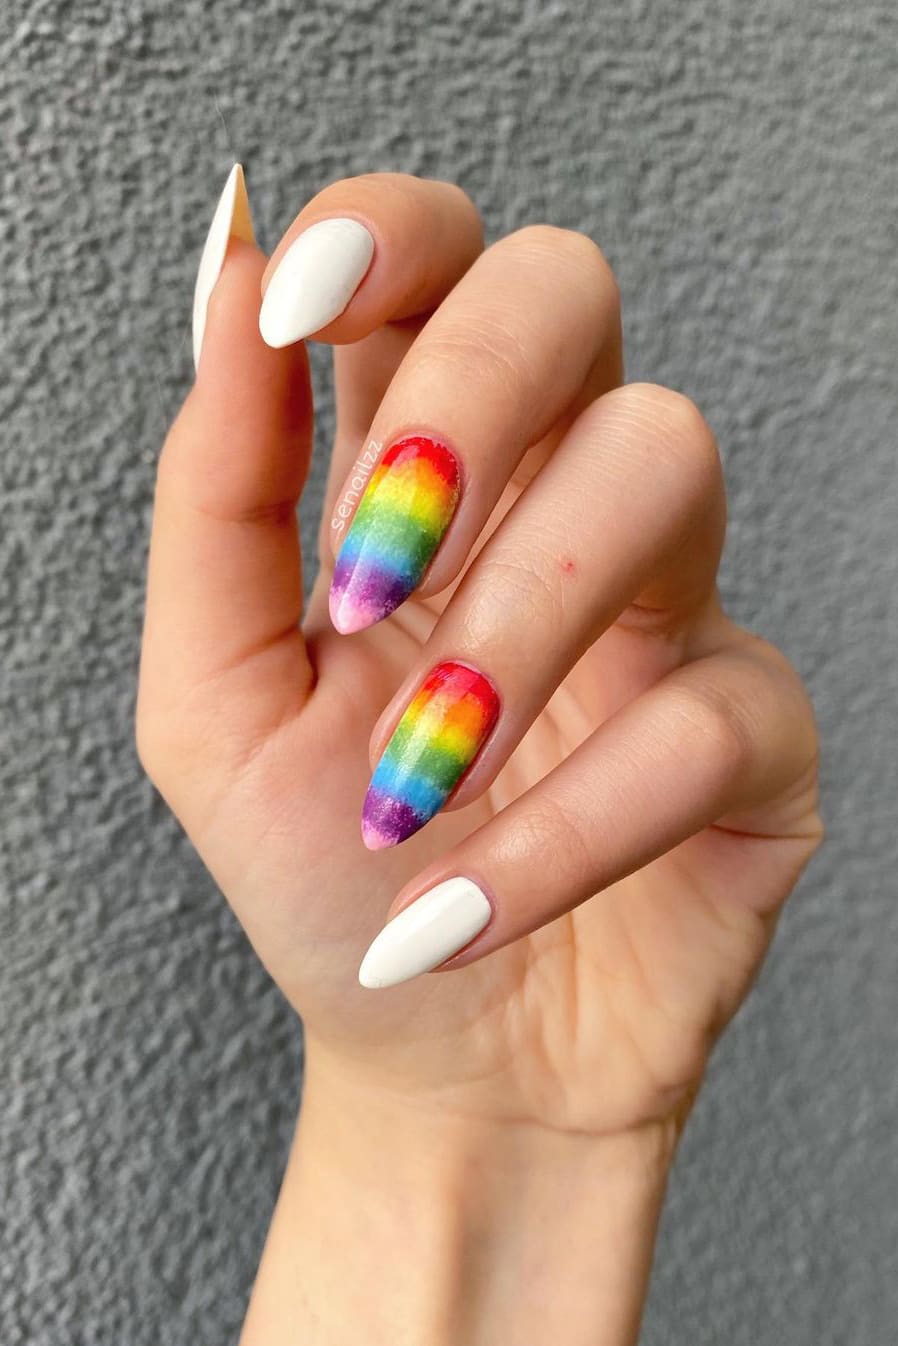 Rainbow nails with white